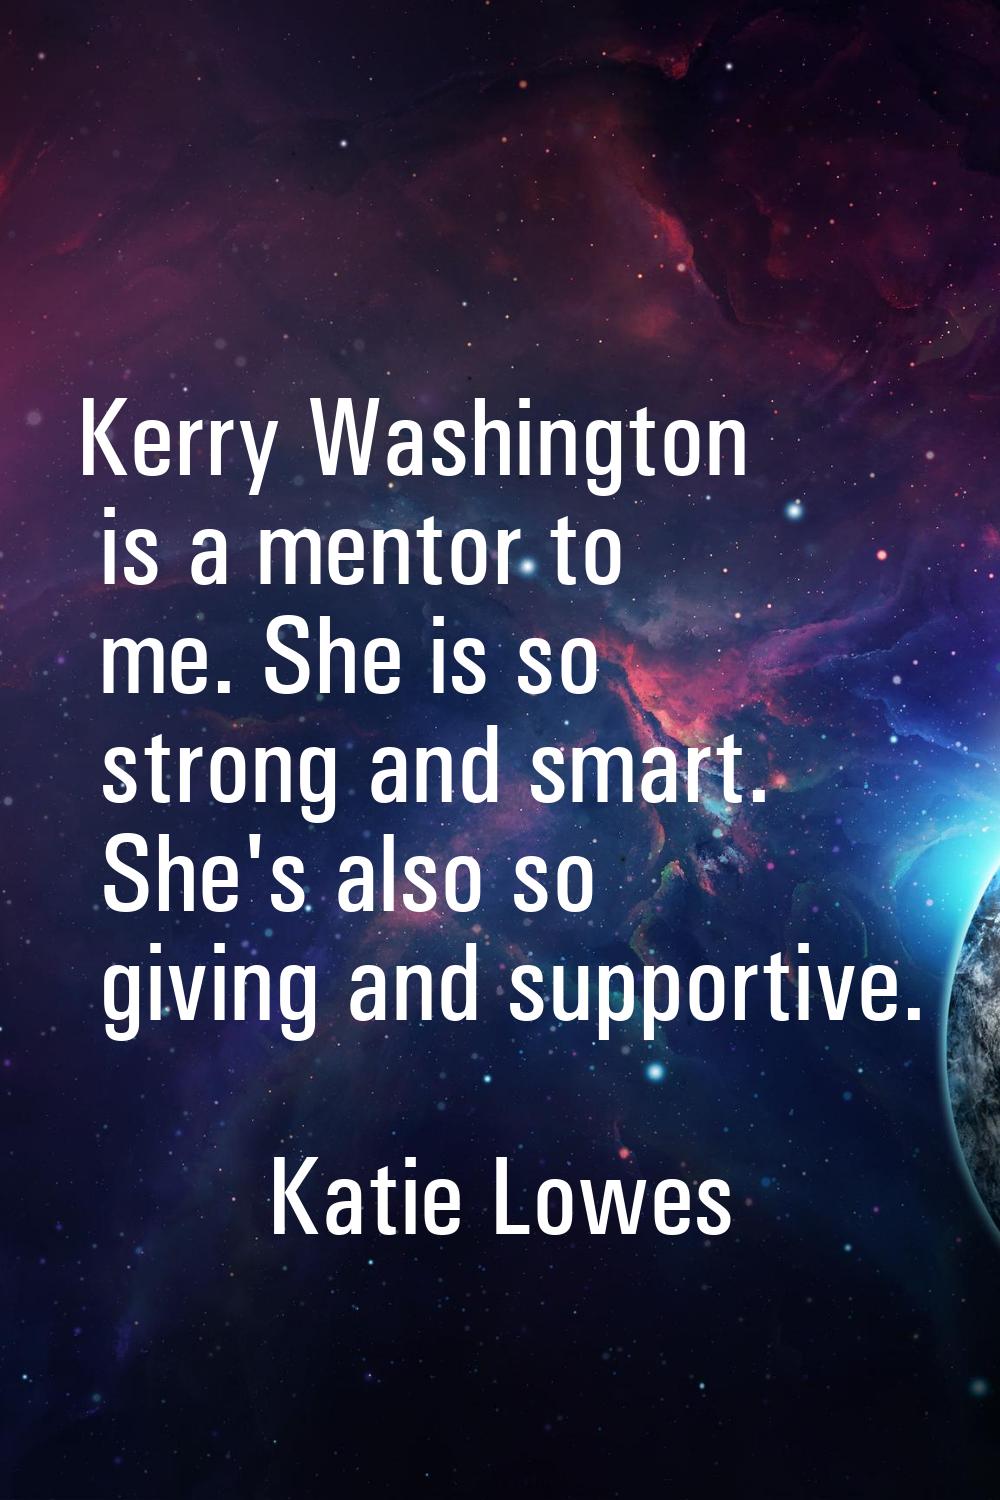 Kerry Washington is a mentor to me. She is so strong and smart. She's also so giving and supportive